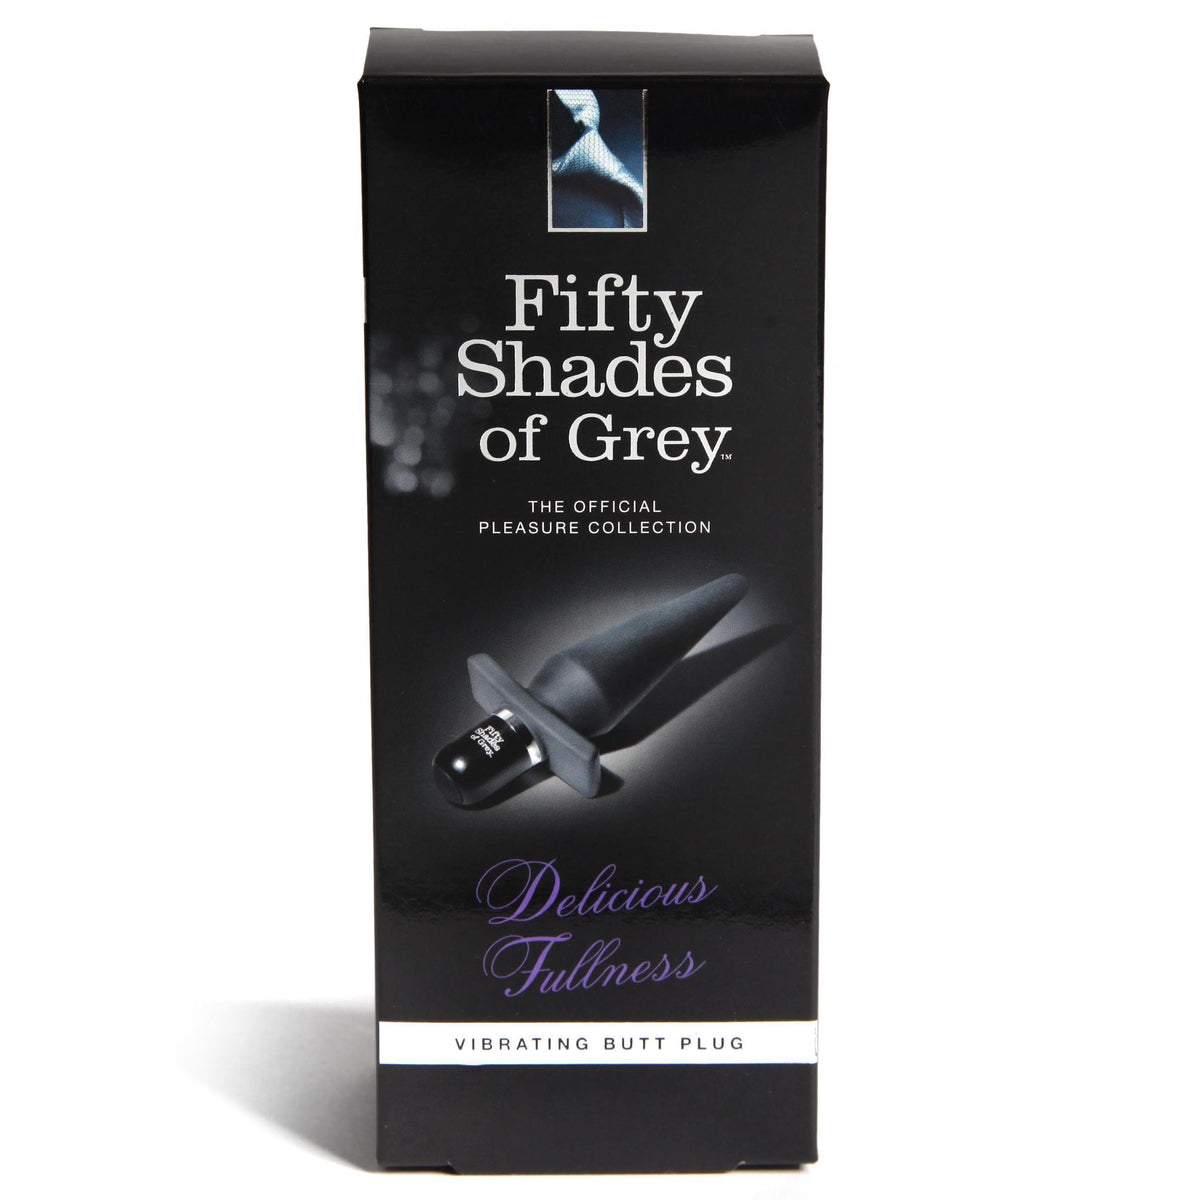 buy fifty shades of grey toys online